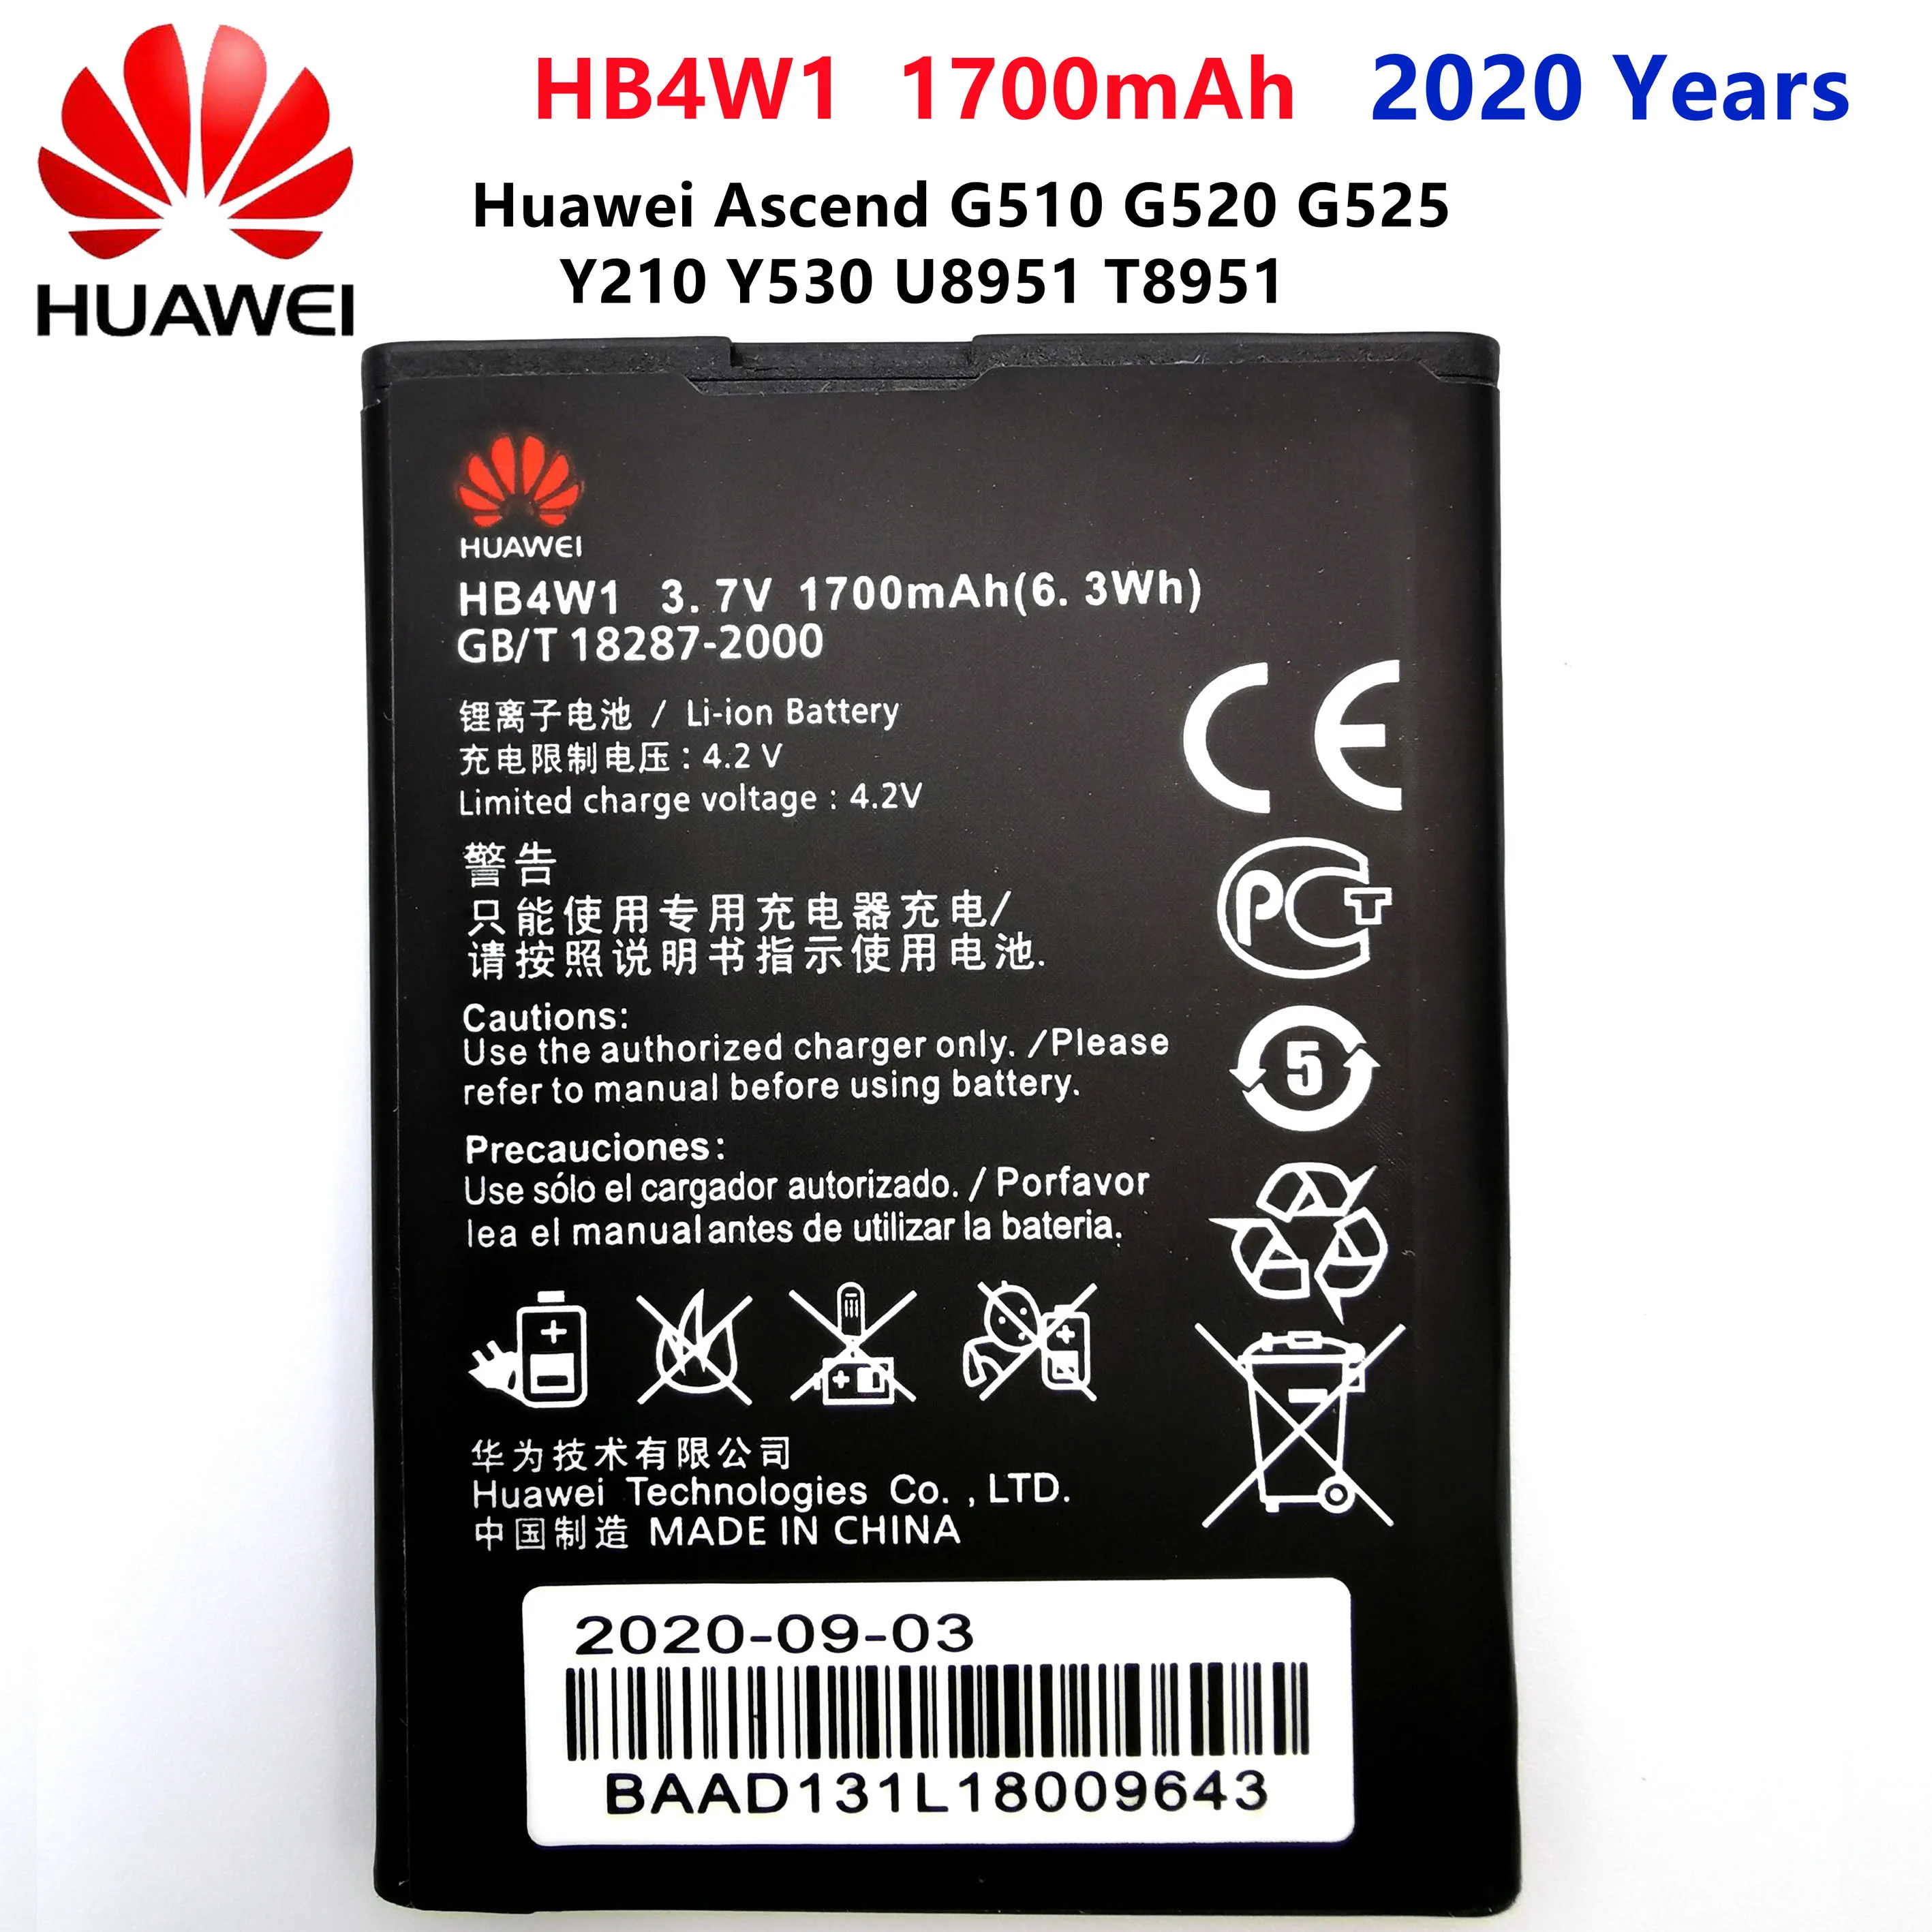 

New 1700mAh HB4W1 Mobile Phone Battery For Huawei G510 T8951 U8951d Y210c C8951 C8813 C8813D Y210C G520 Y210 Battery